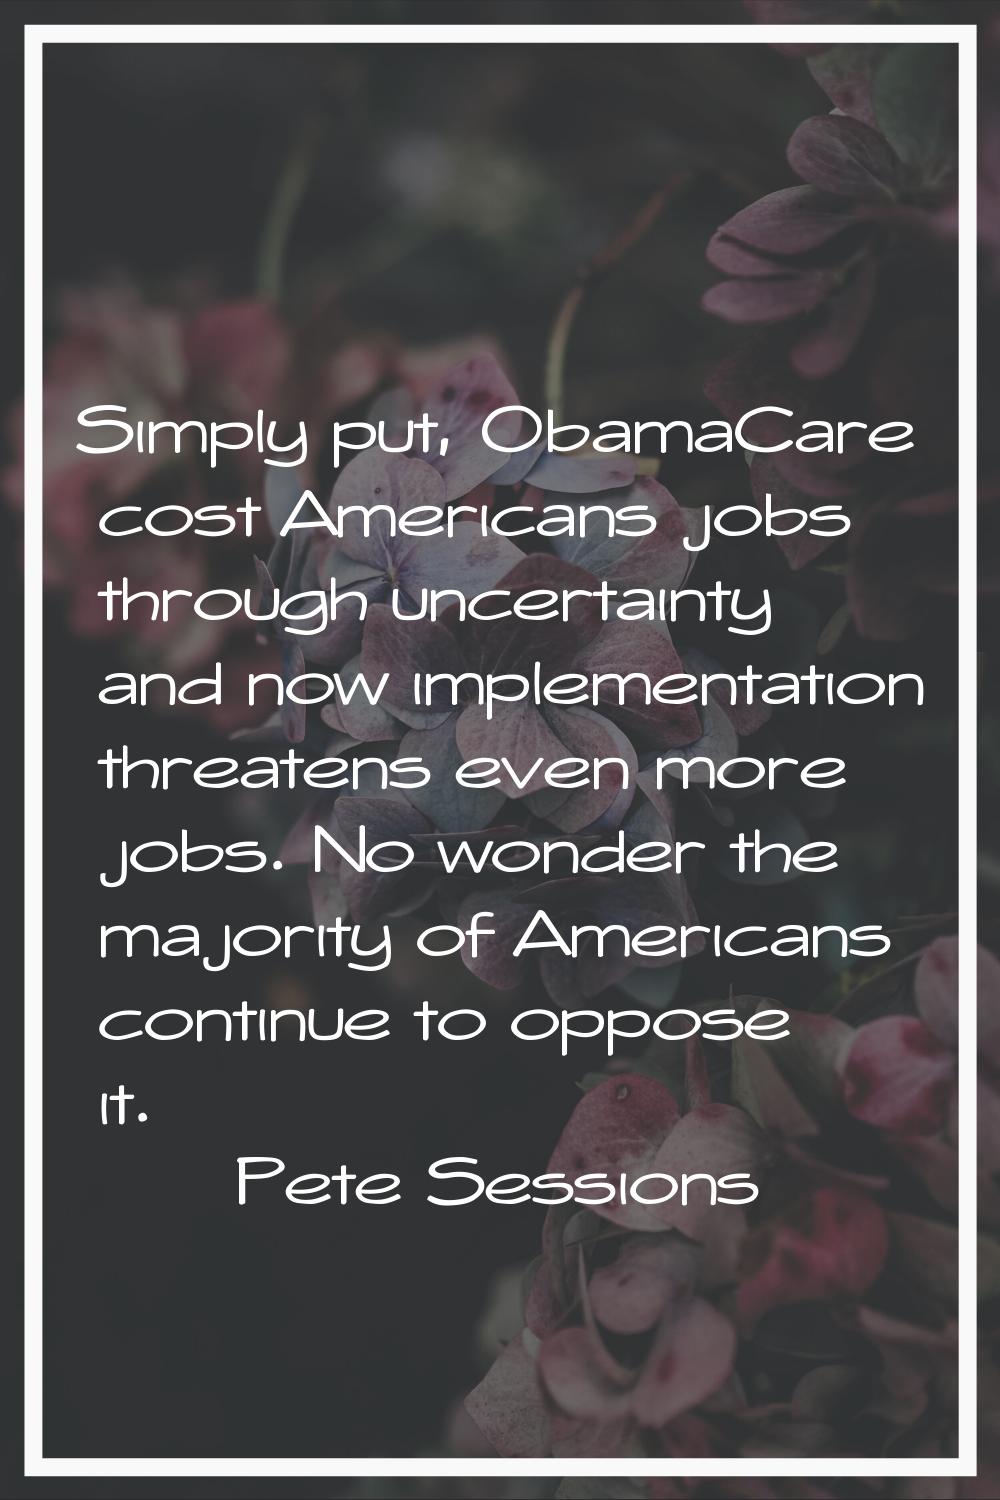 Simply put, ObamaCare cost Americans jobs through uncertainty and now implementation threatens even